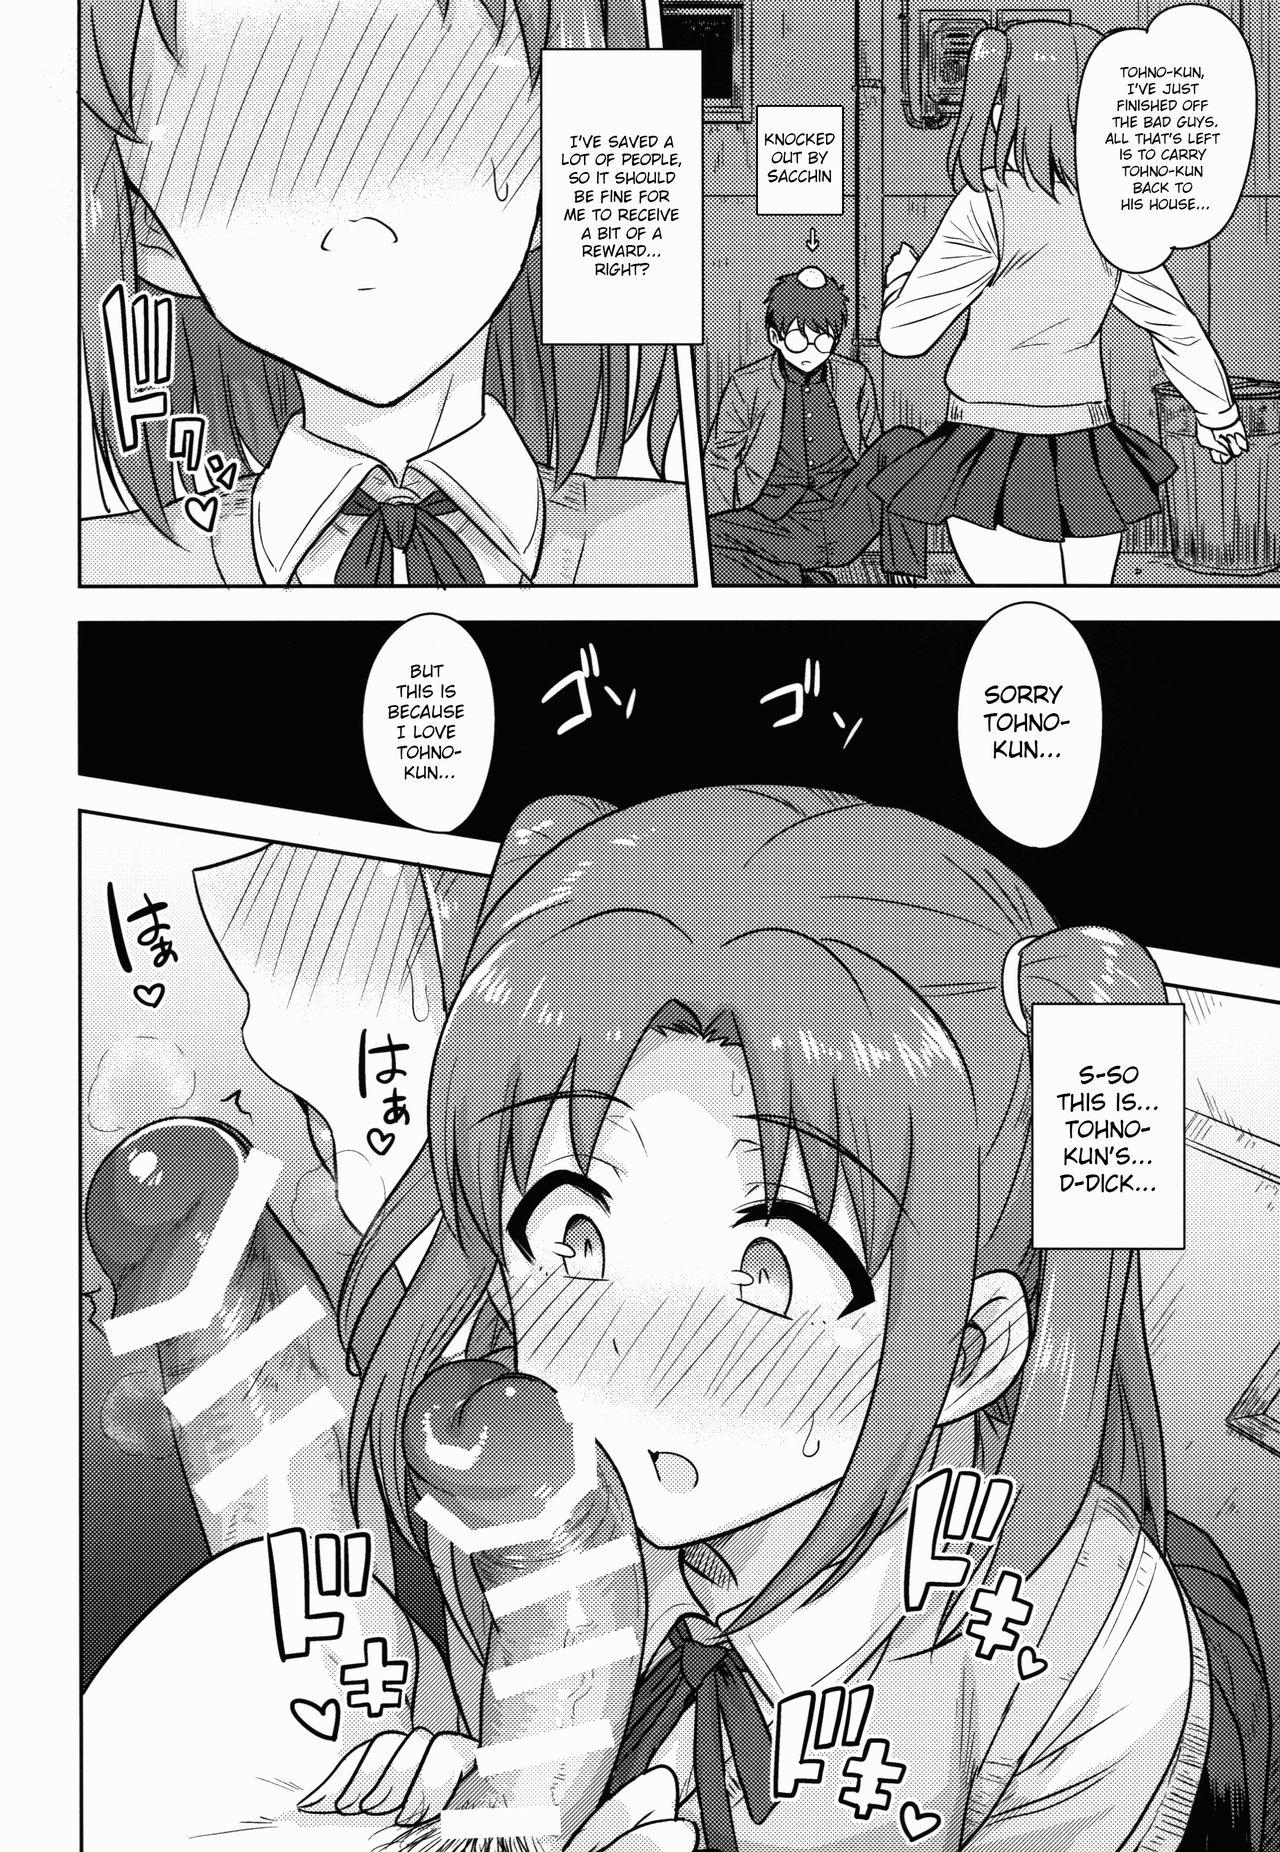 Public Nudity Aru Hi no Futari MelBlo Hen | A Certain Day with Each Other Melty Blood Hen - Tsukihime Pickup - Page 9